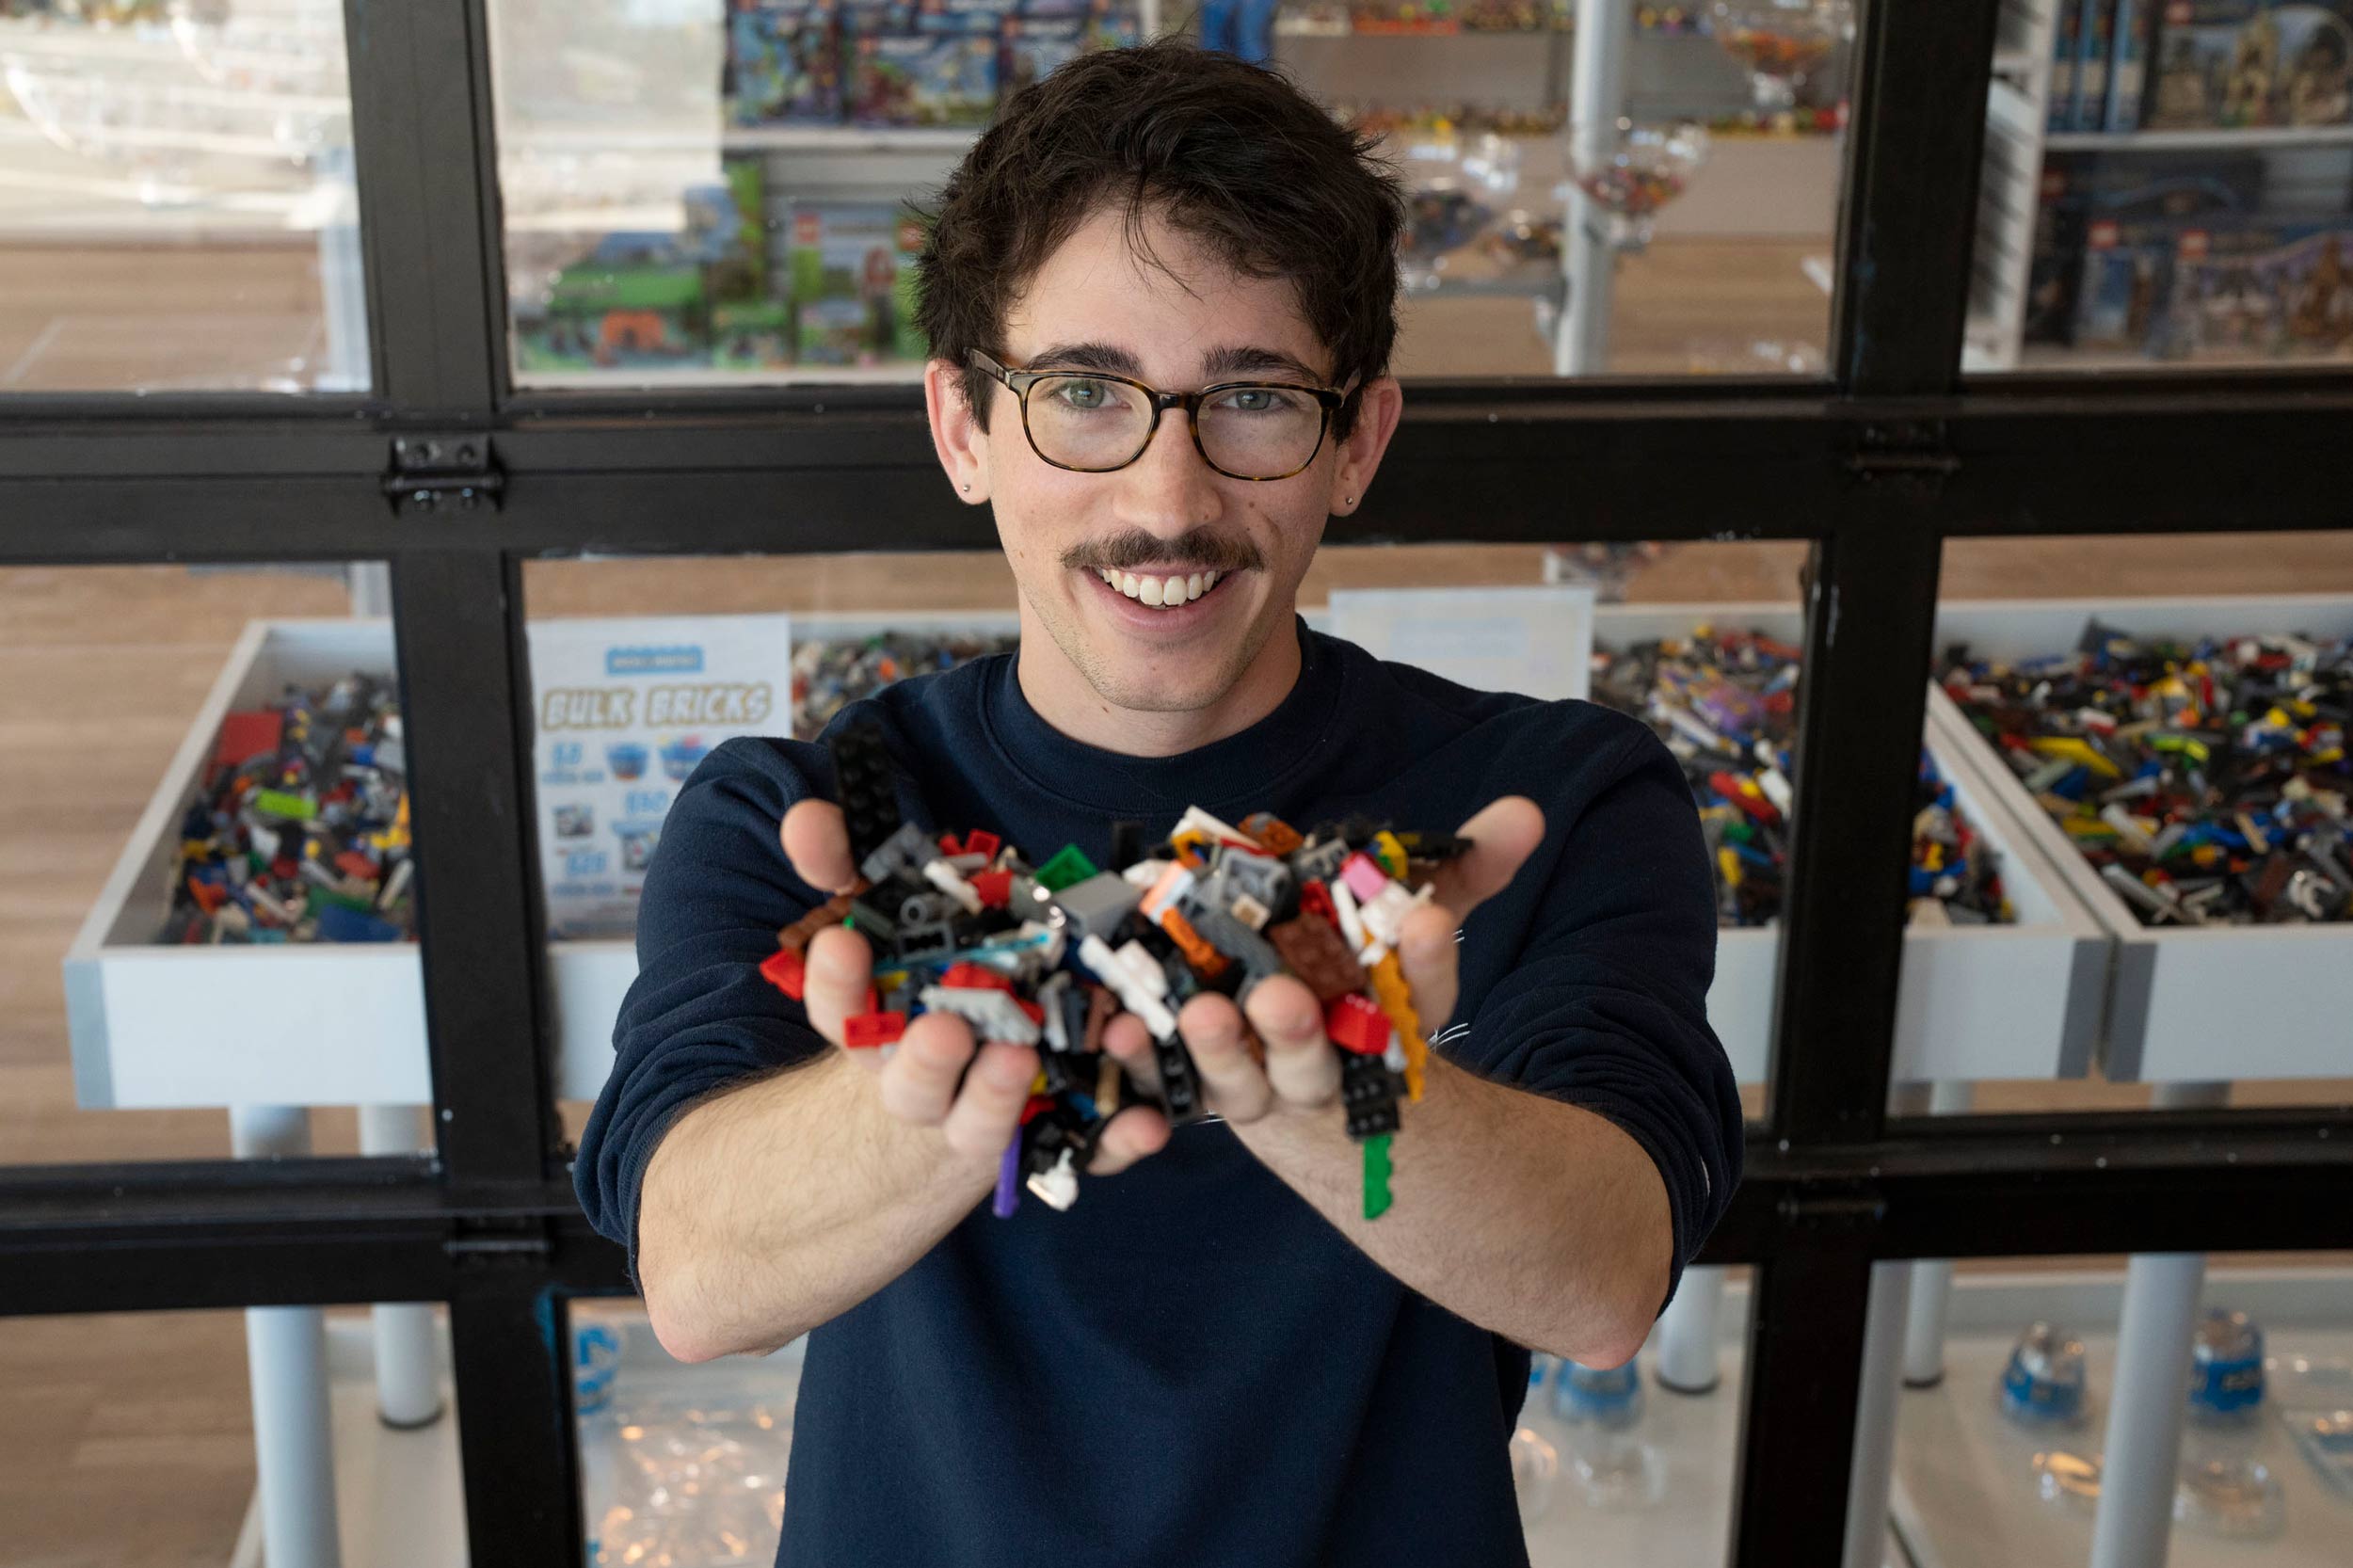 Ben Edlavitch smiles at the camera and holds up two handfuls of legos.